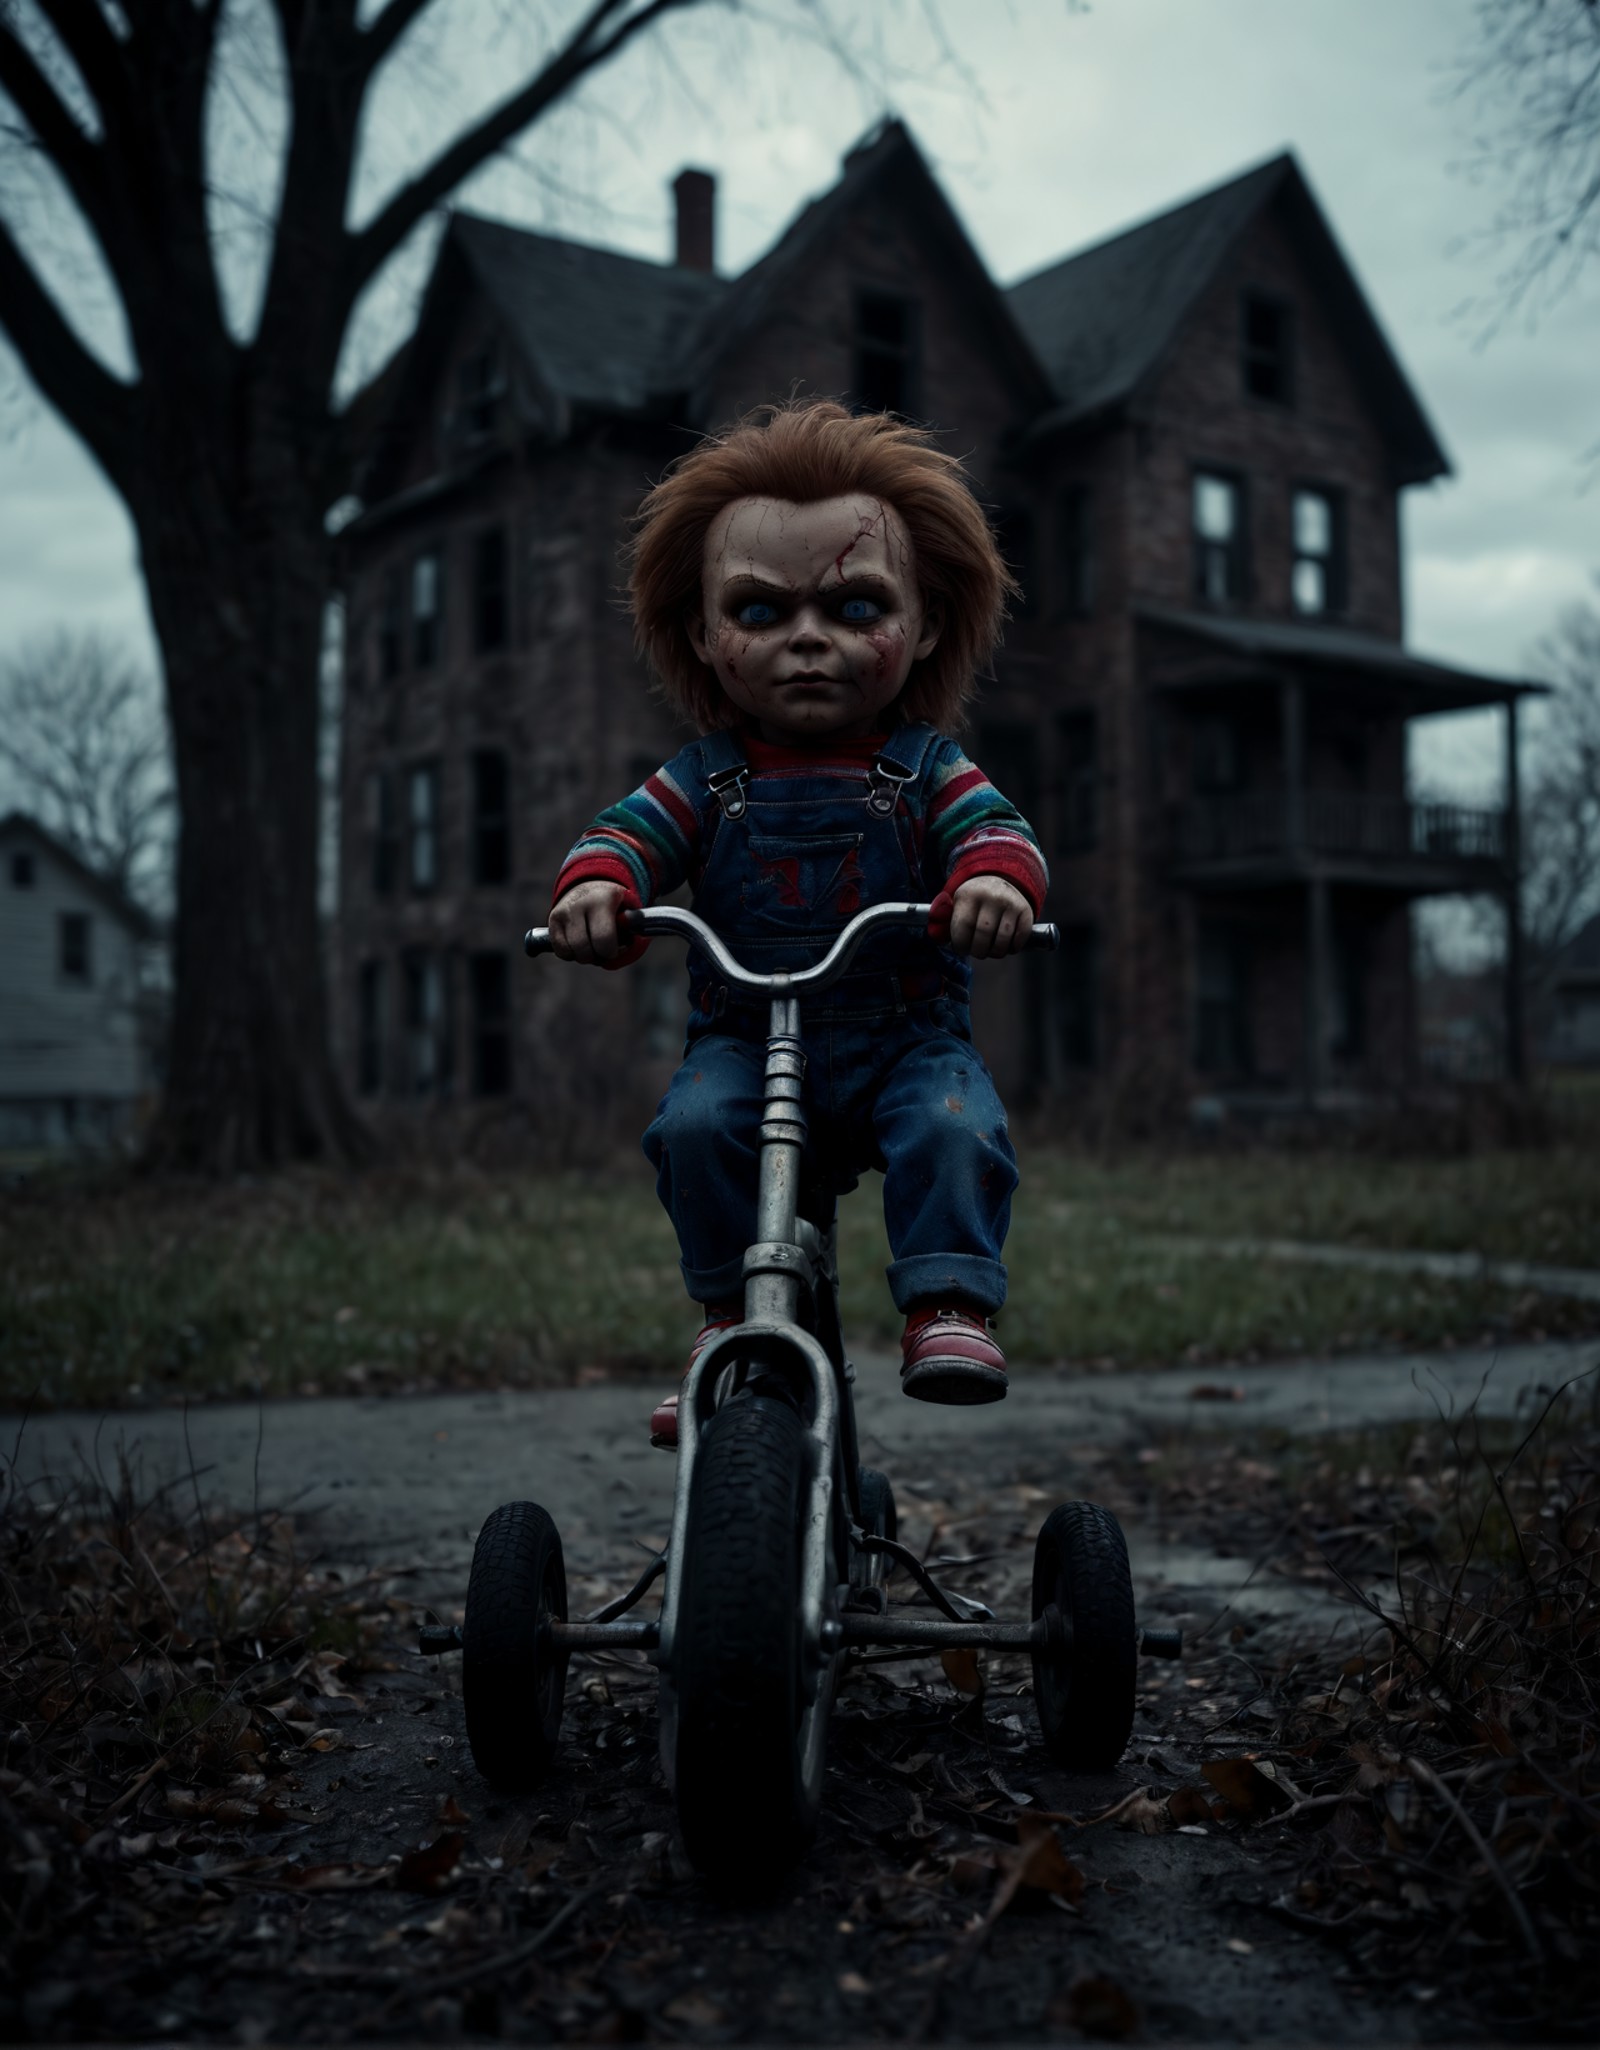 breathtaking, Chucky the Doll riding on a tricycle through an eerie abandoned neighborhood decaying houses, large dead tre...